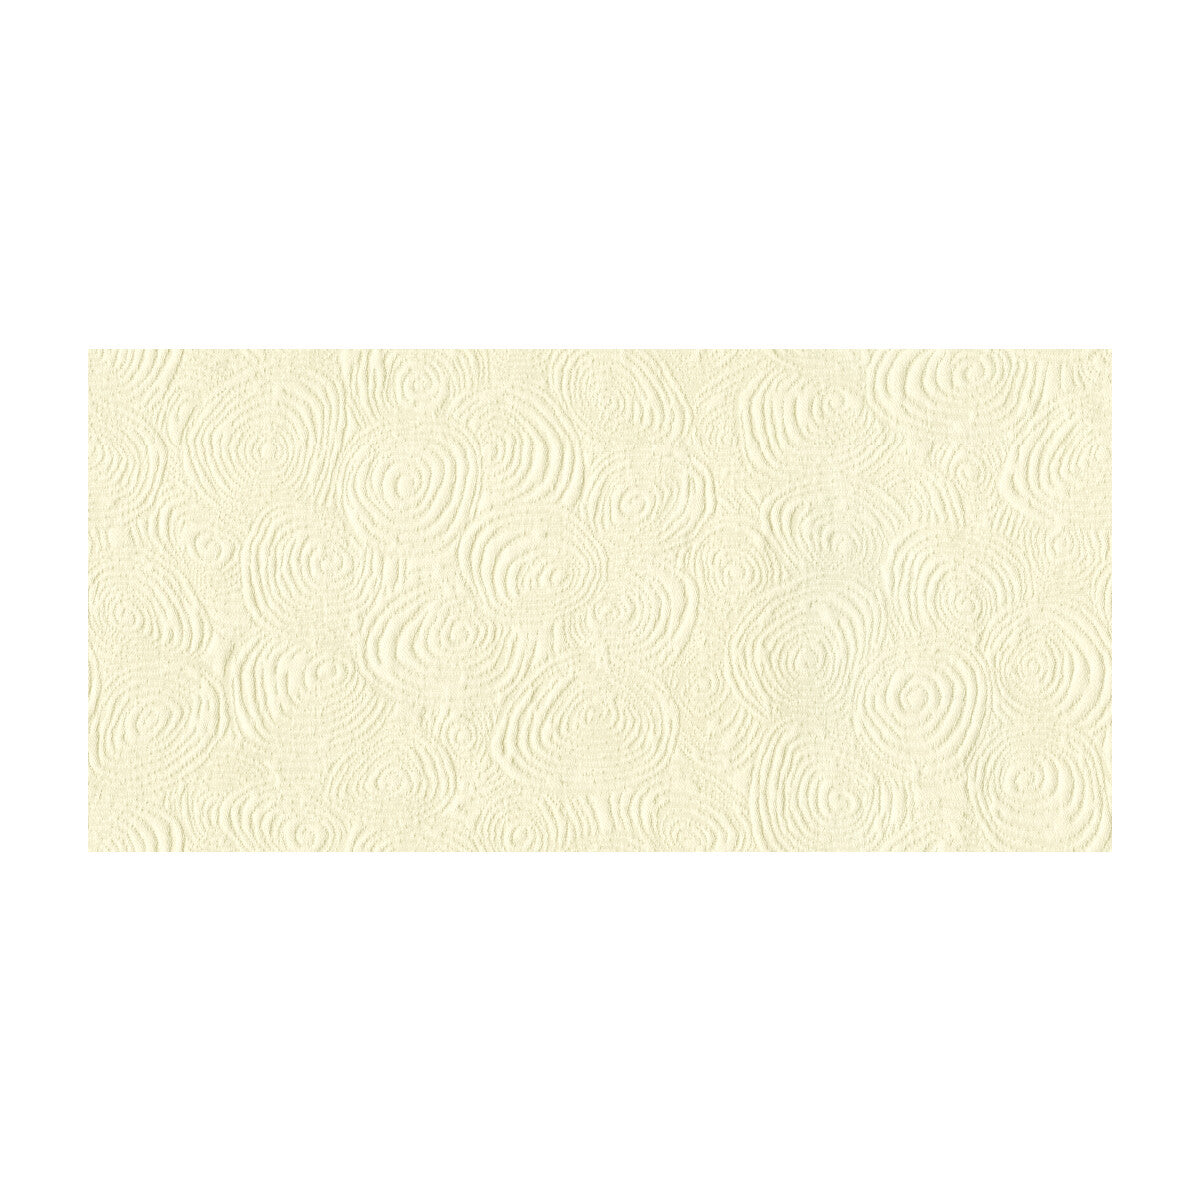 Hart fabric in ivory color - pattern 33414.101.0 - by Kravet Basics in the Jeffrey Alan Marks Waterside collection